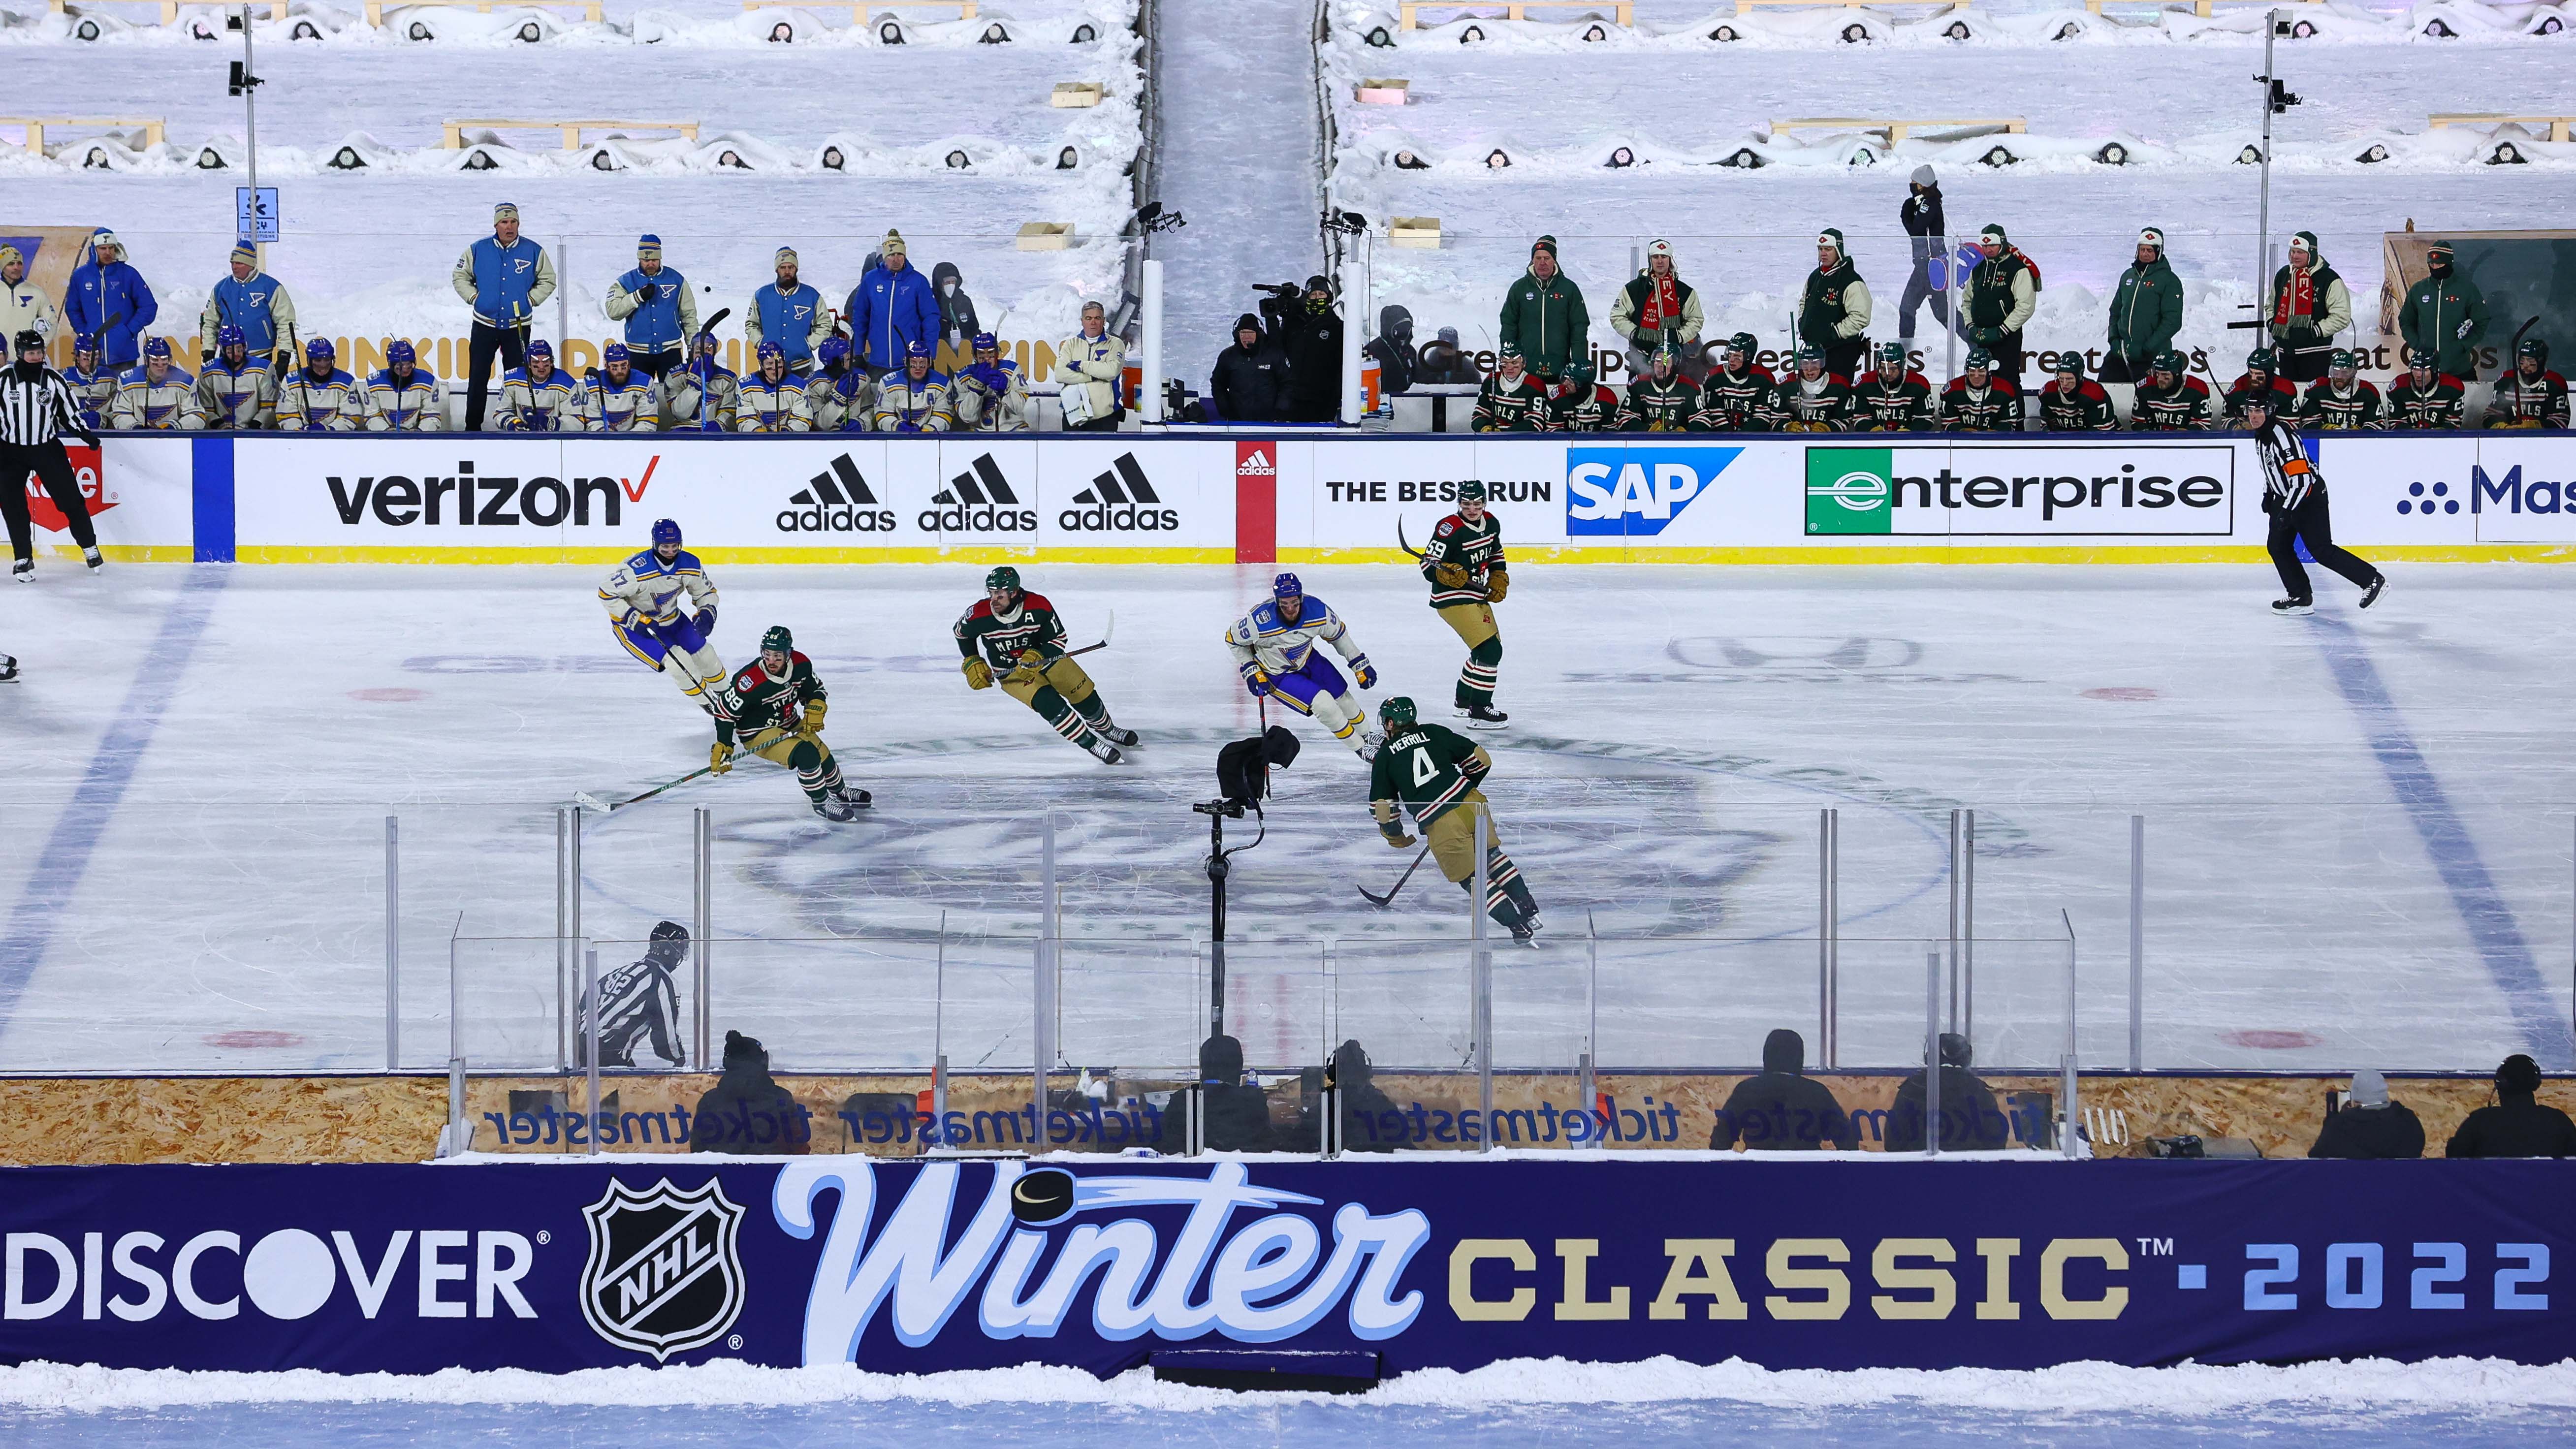 A general view of the game against the Minnesota Wild and St. Louis Blues at Target Field on January 1, 2022 in Minneapolis, Minnesota.